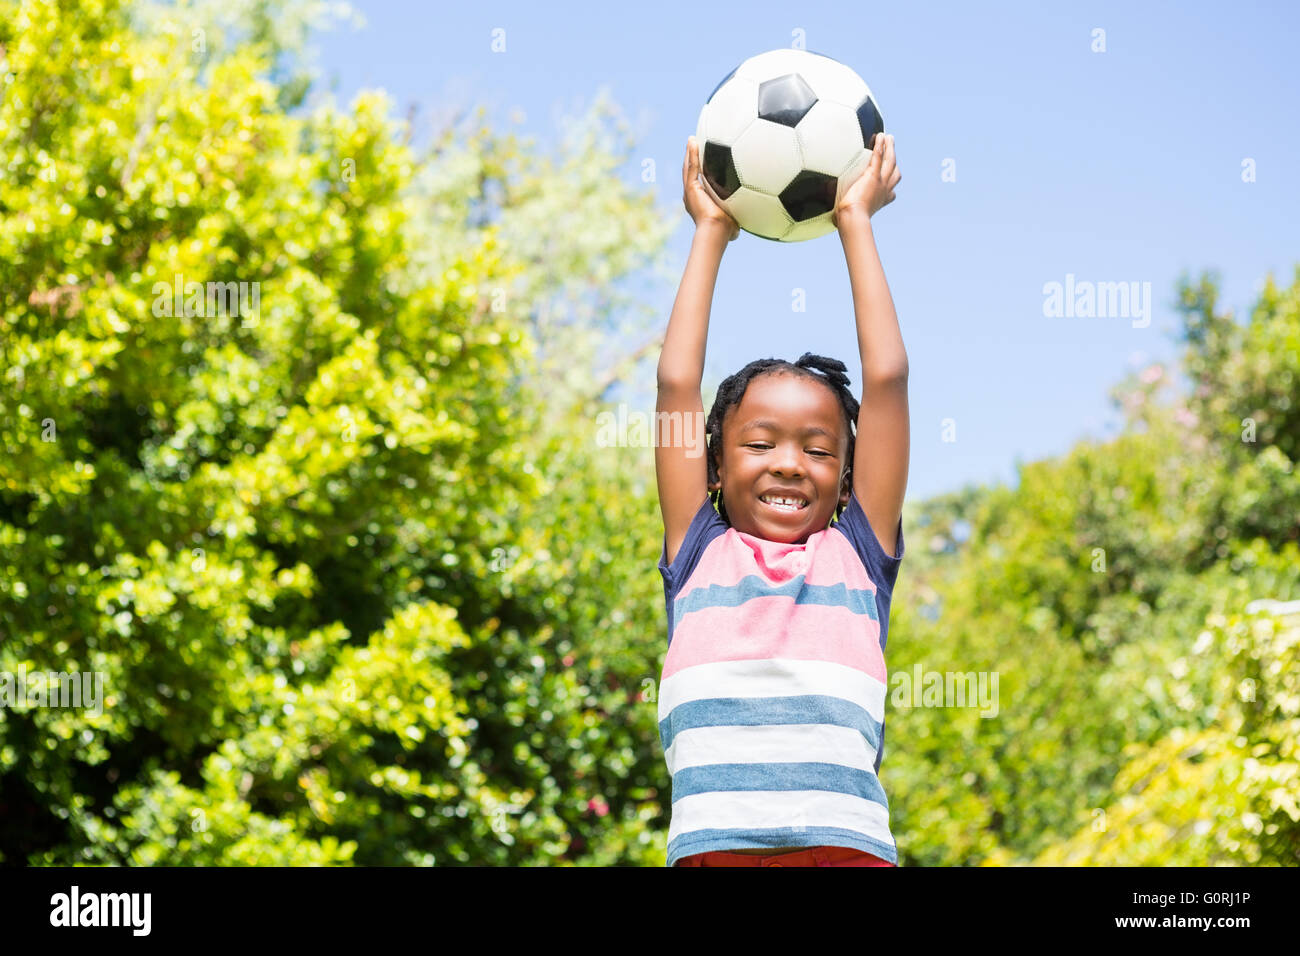 Smiling boy holding a ball Stock Photo